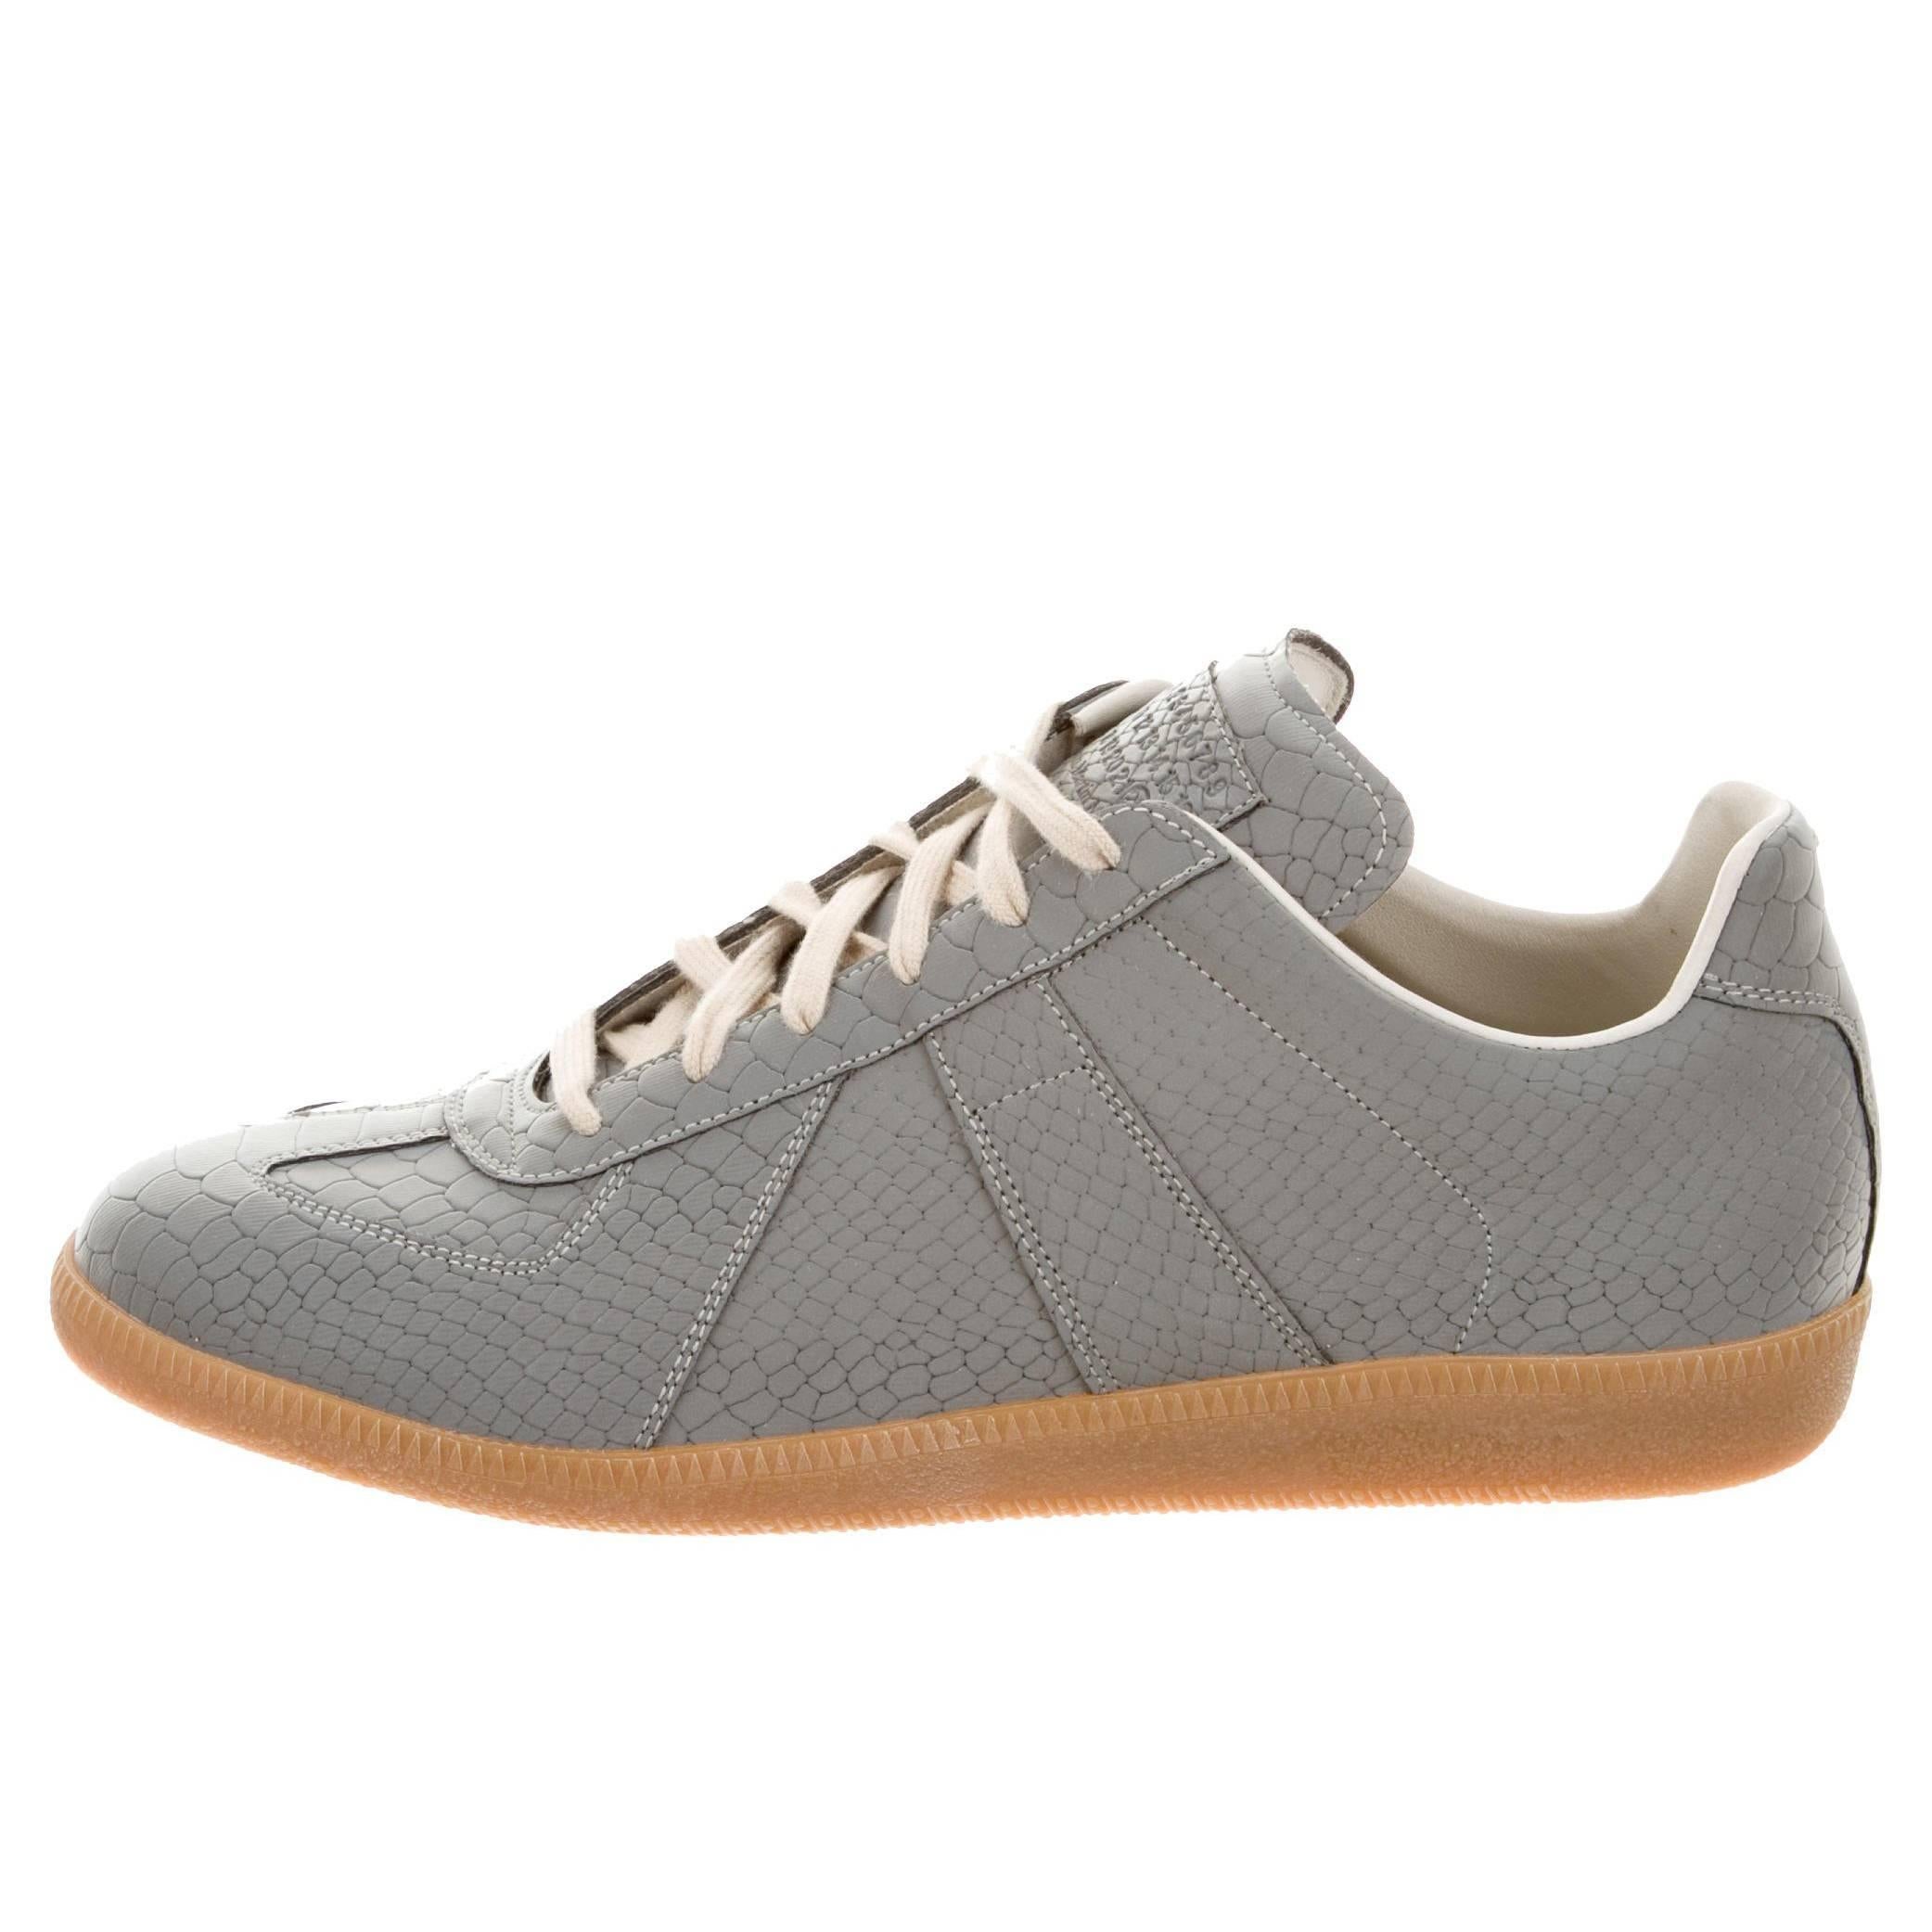 Maison Martin Margiela NEW Men's Gray Leather Low Tops Sneakers Shoes in Box